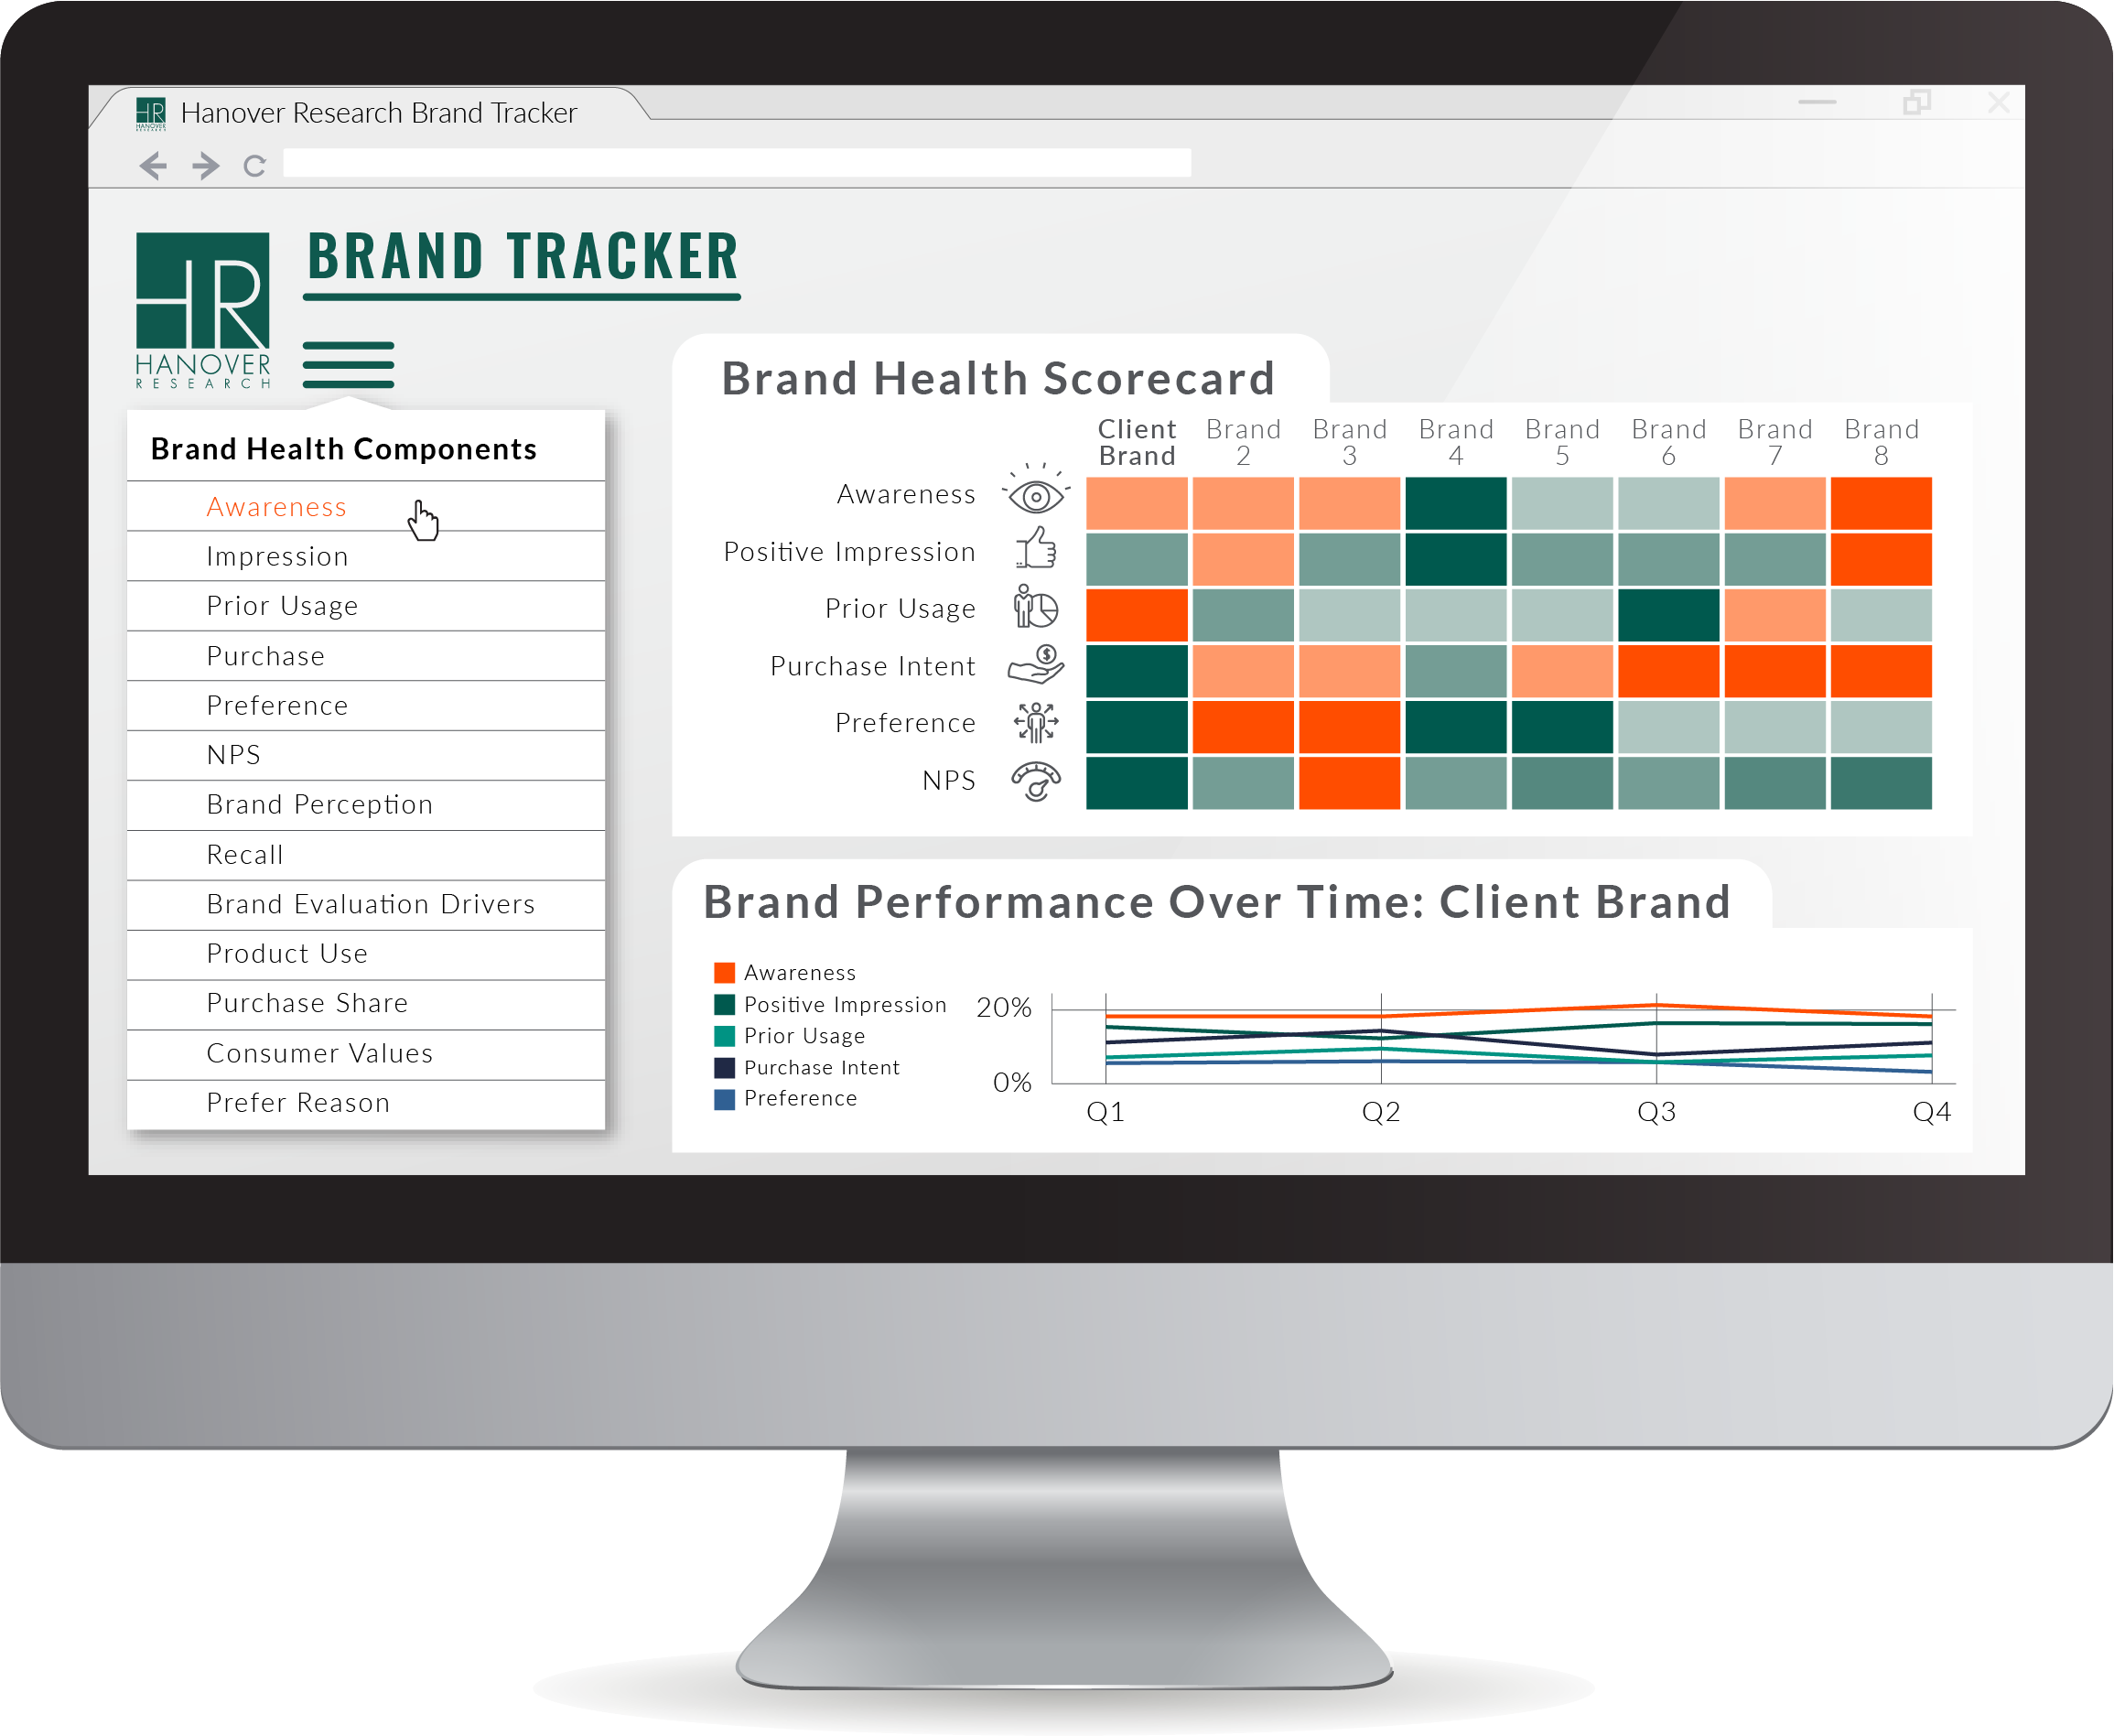 Hanover Research Brand Tracker